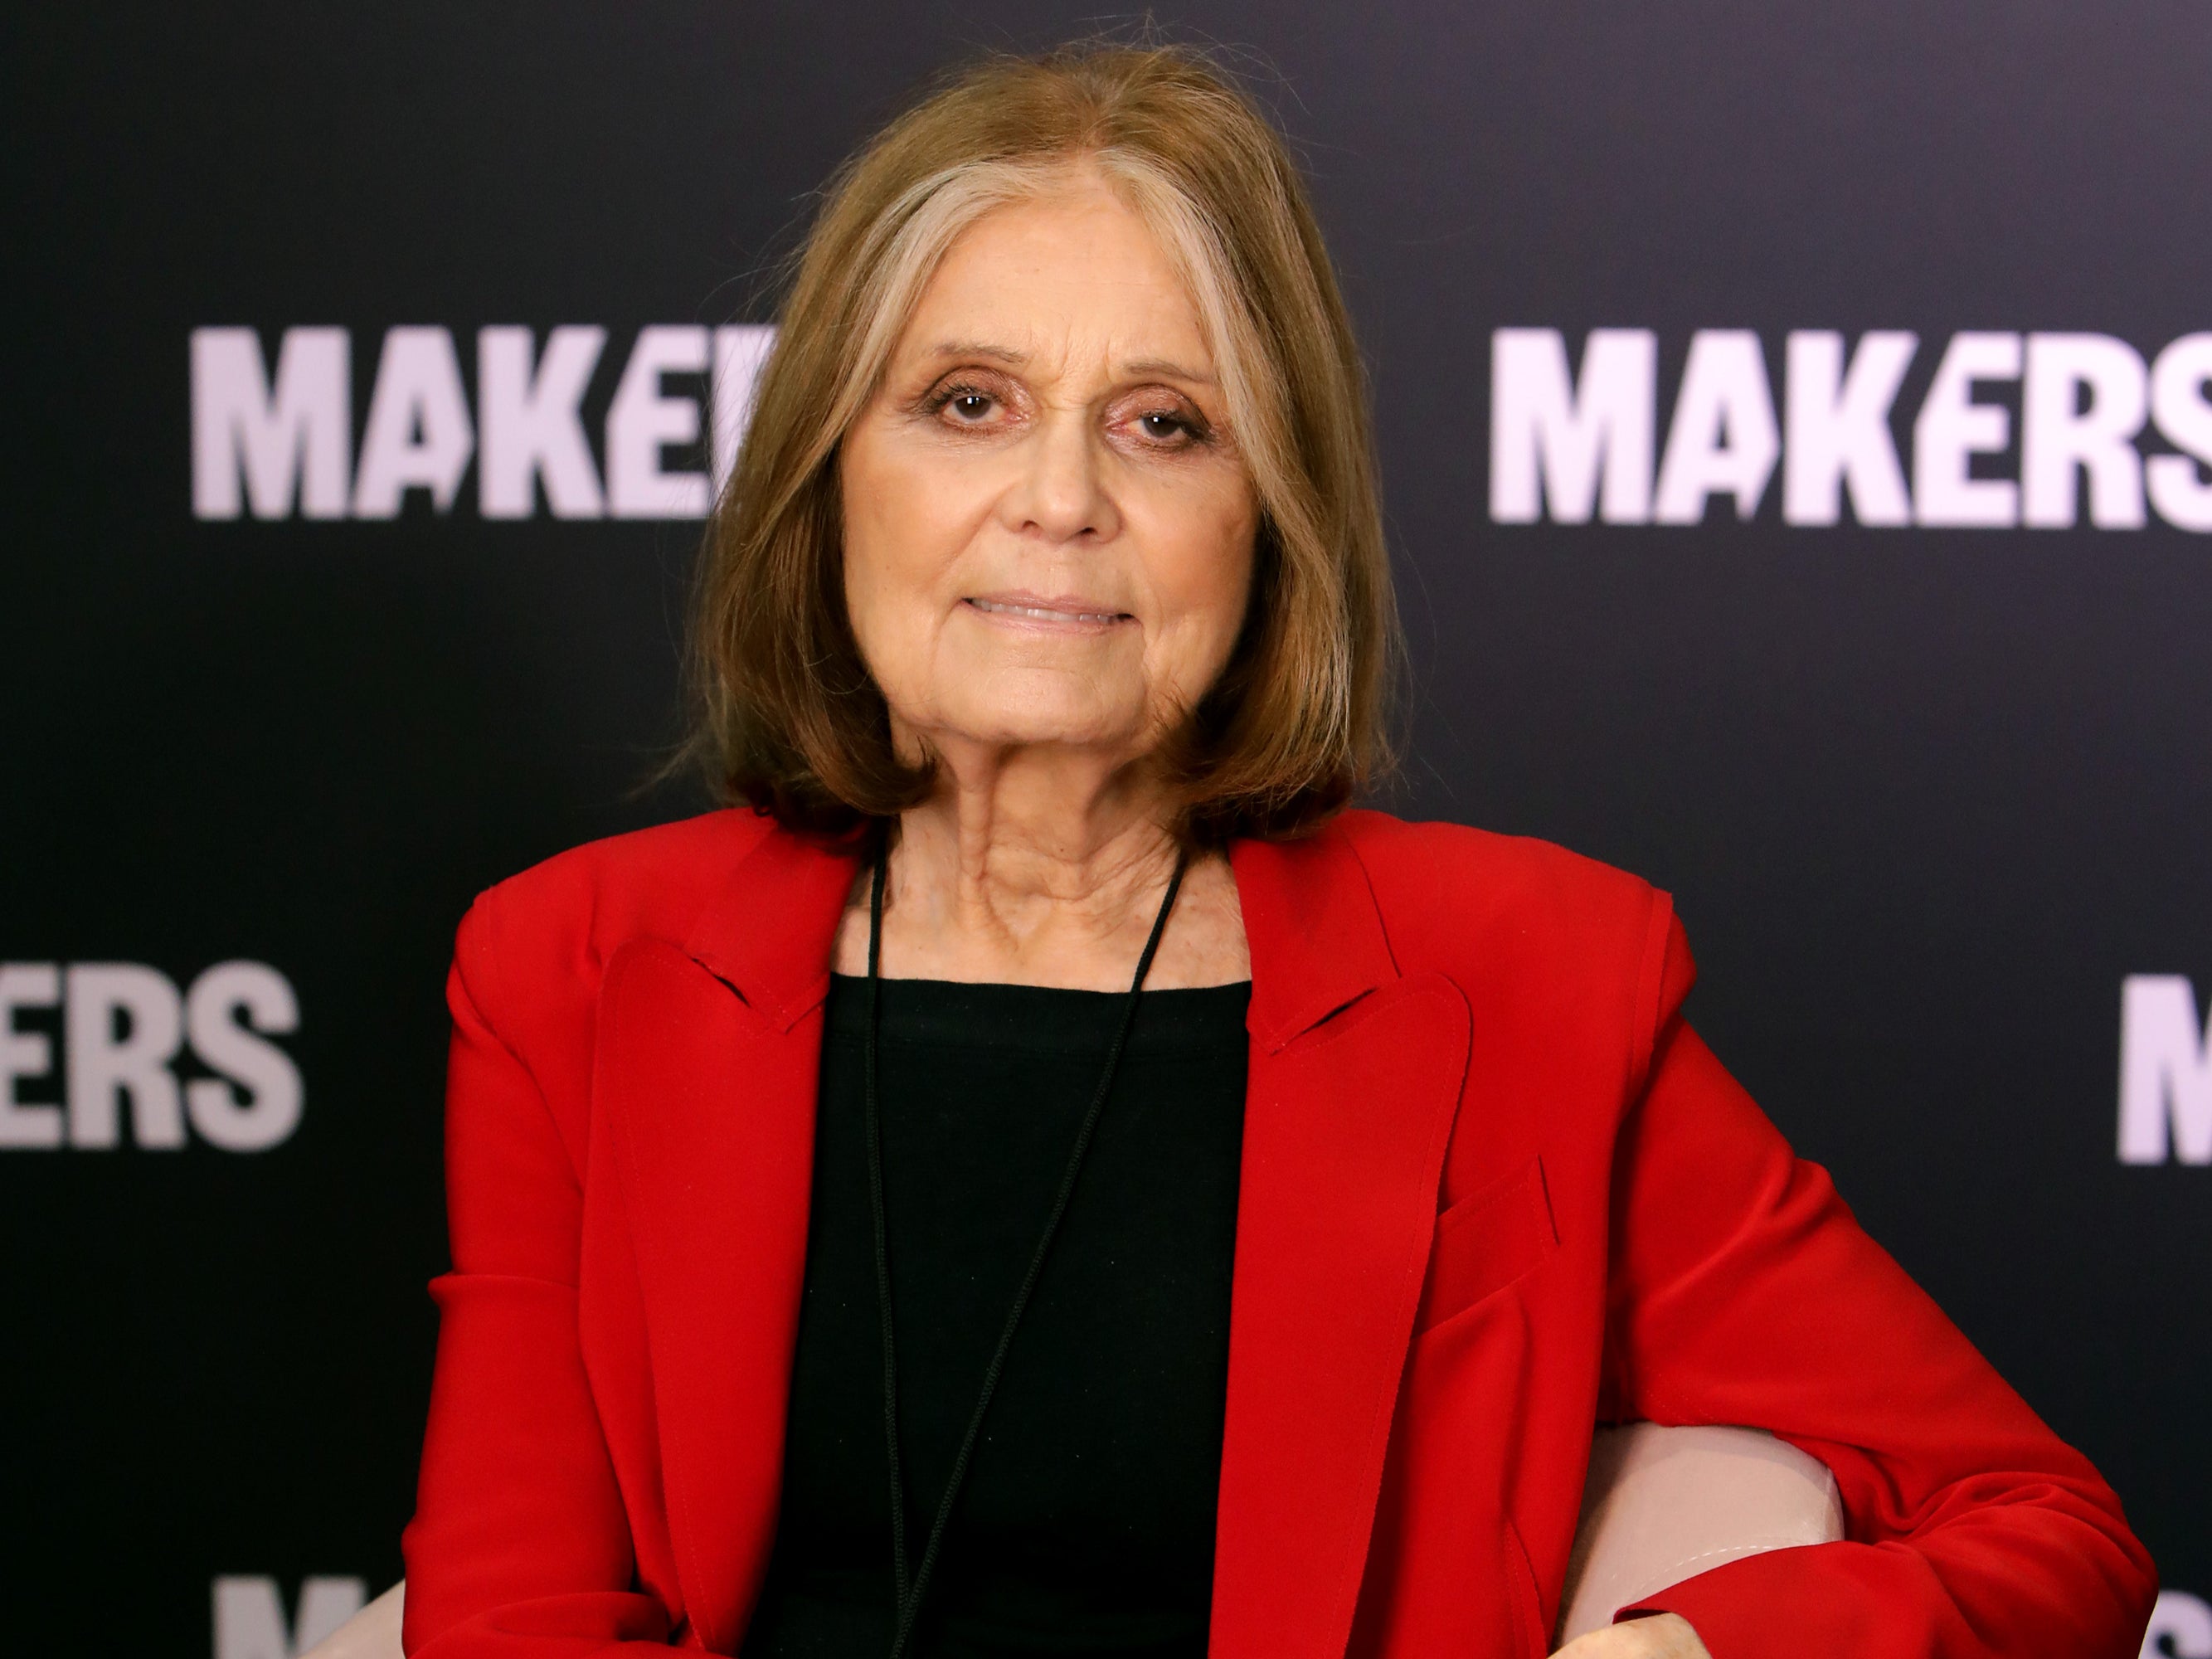 Gloria Steinem attends the 2020 MAKERS conference on 11 February 2020 in Los Angeles, California